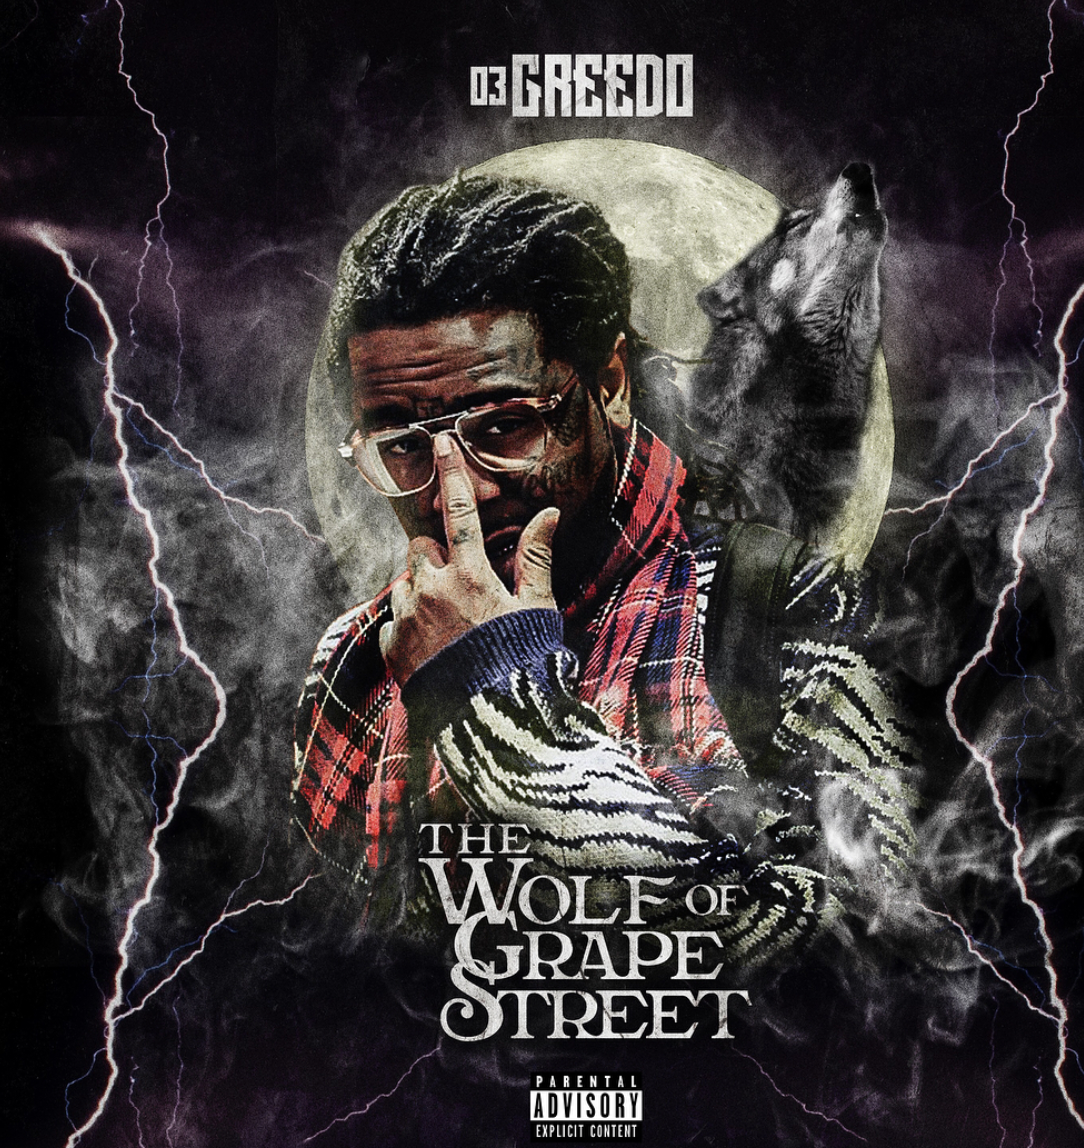 03 Greedo Shares Three New Singles & Reveals Release Date For ‘The Wolf Of Grape Street’ [PEEP]